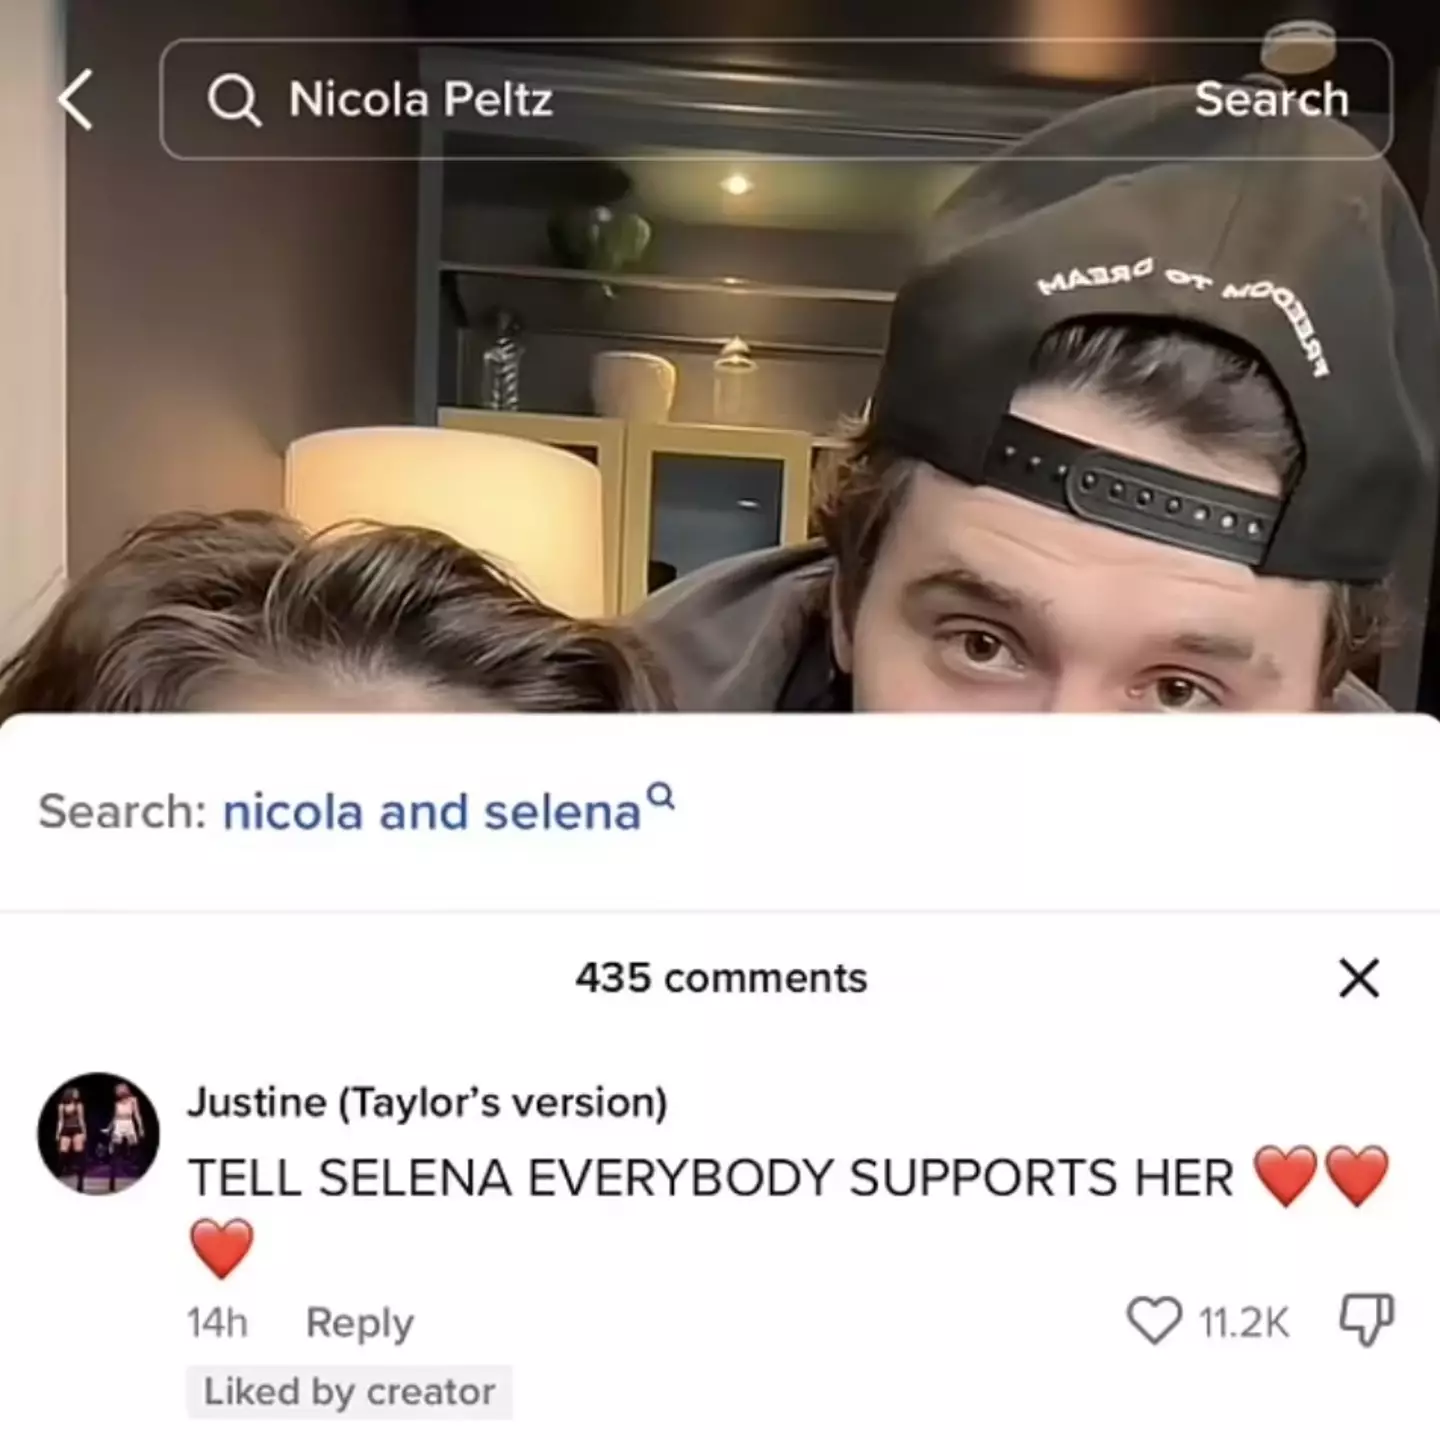 Nicola liked the supportive comment about Selena.